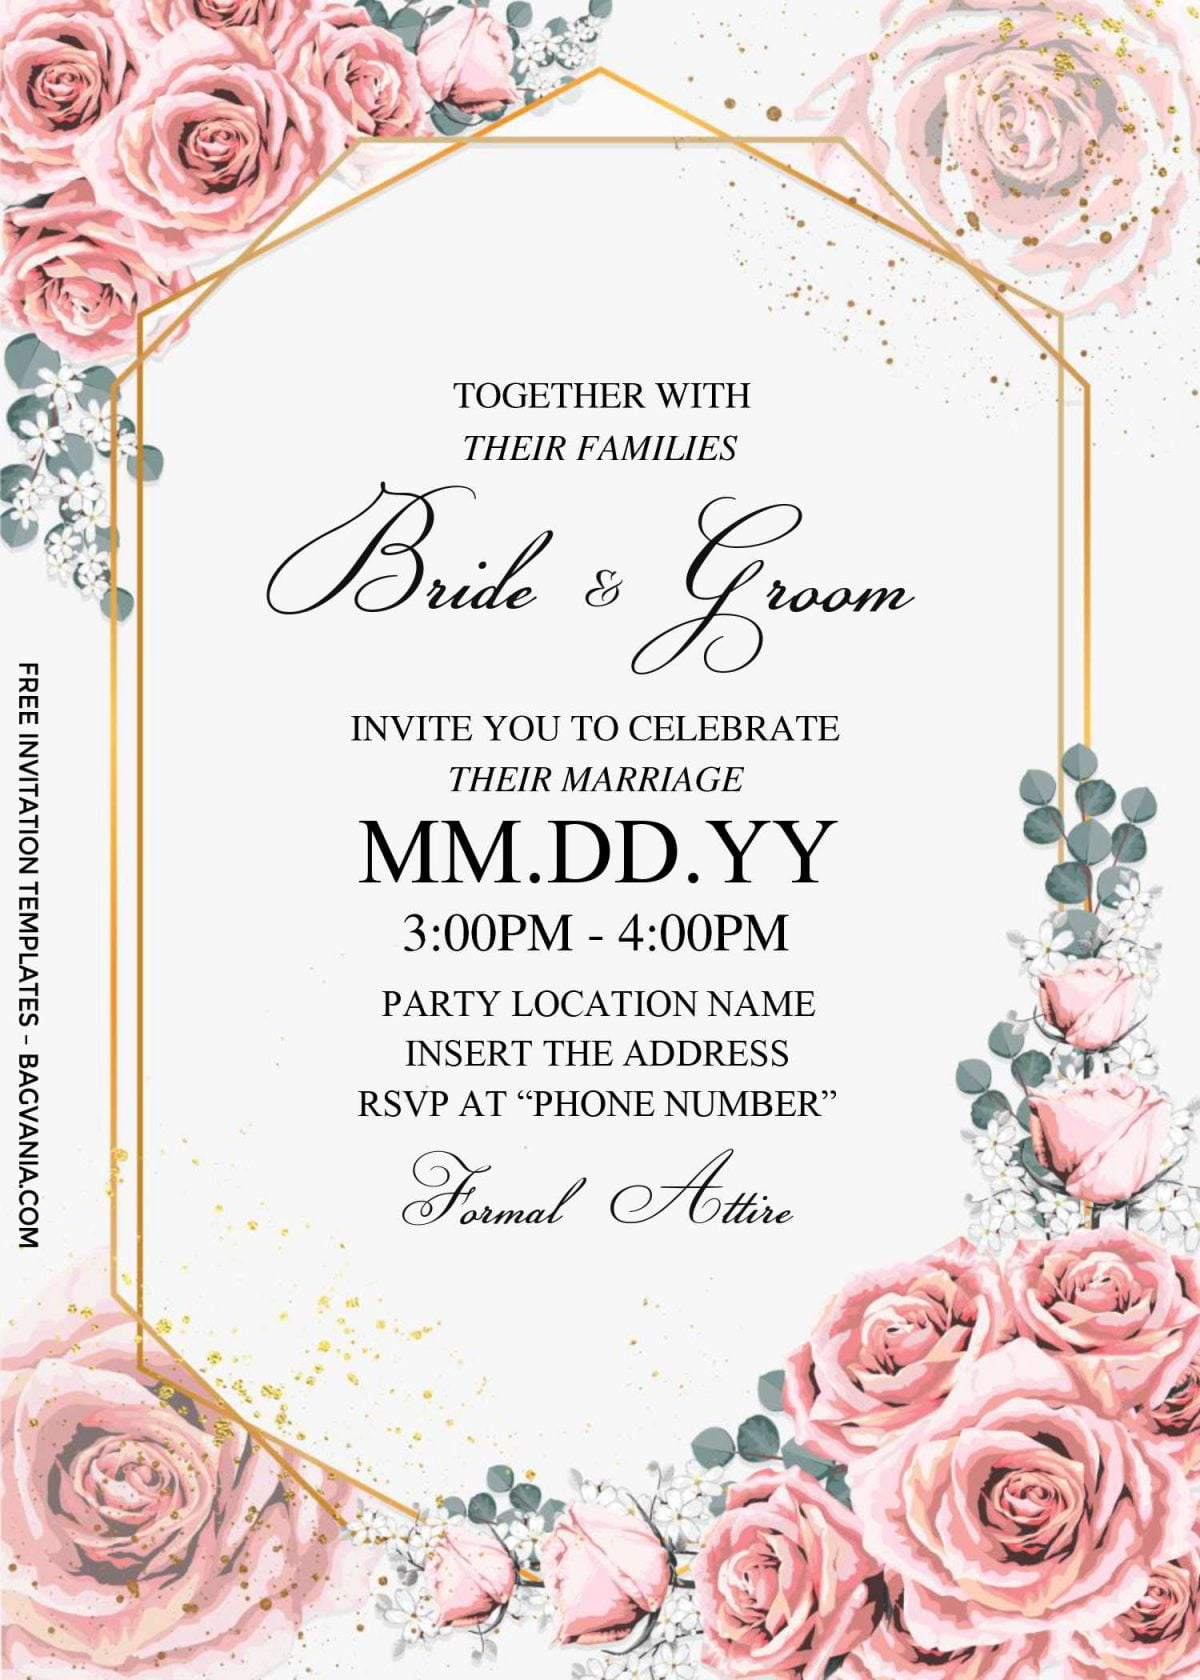 Free Dusty Rose Wedding Invitation Templates For Word | FREE Printable ...